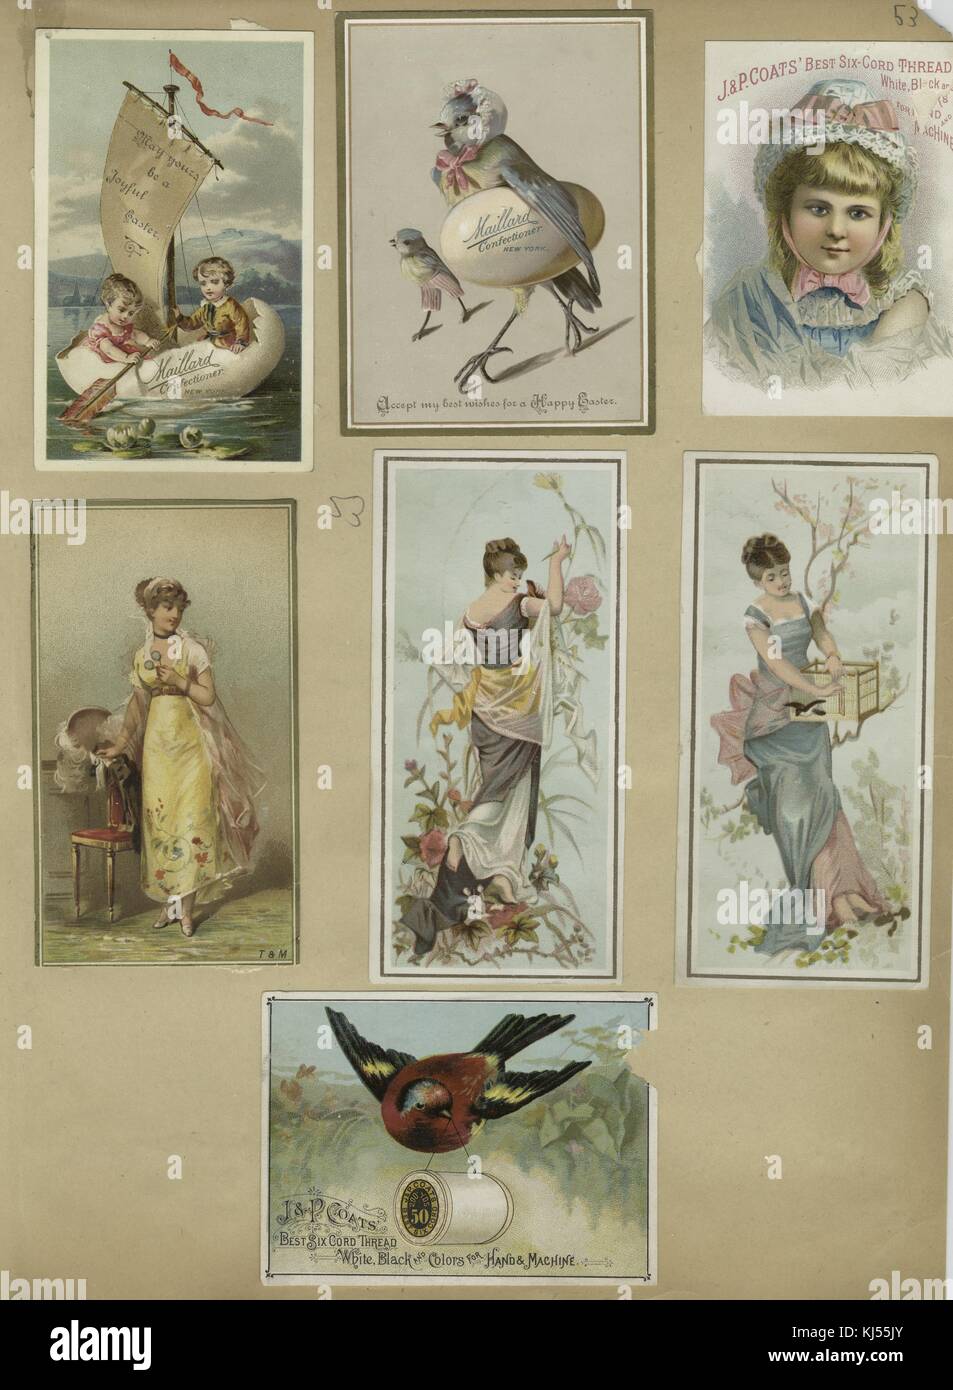 Easter and trade cards depicting women, children, birds, eggs, thread, a birdcage and a boat made from an egg, 1883. From the New York Public Library. Stock Photo